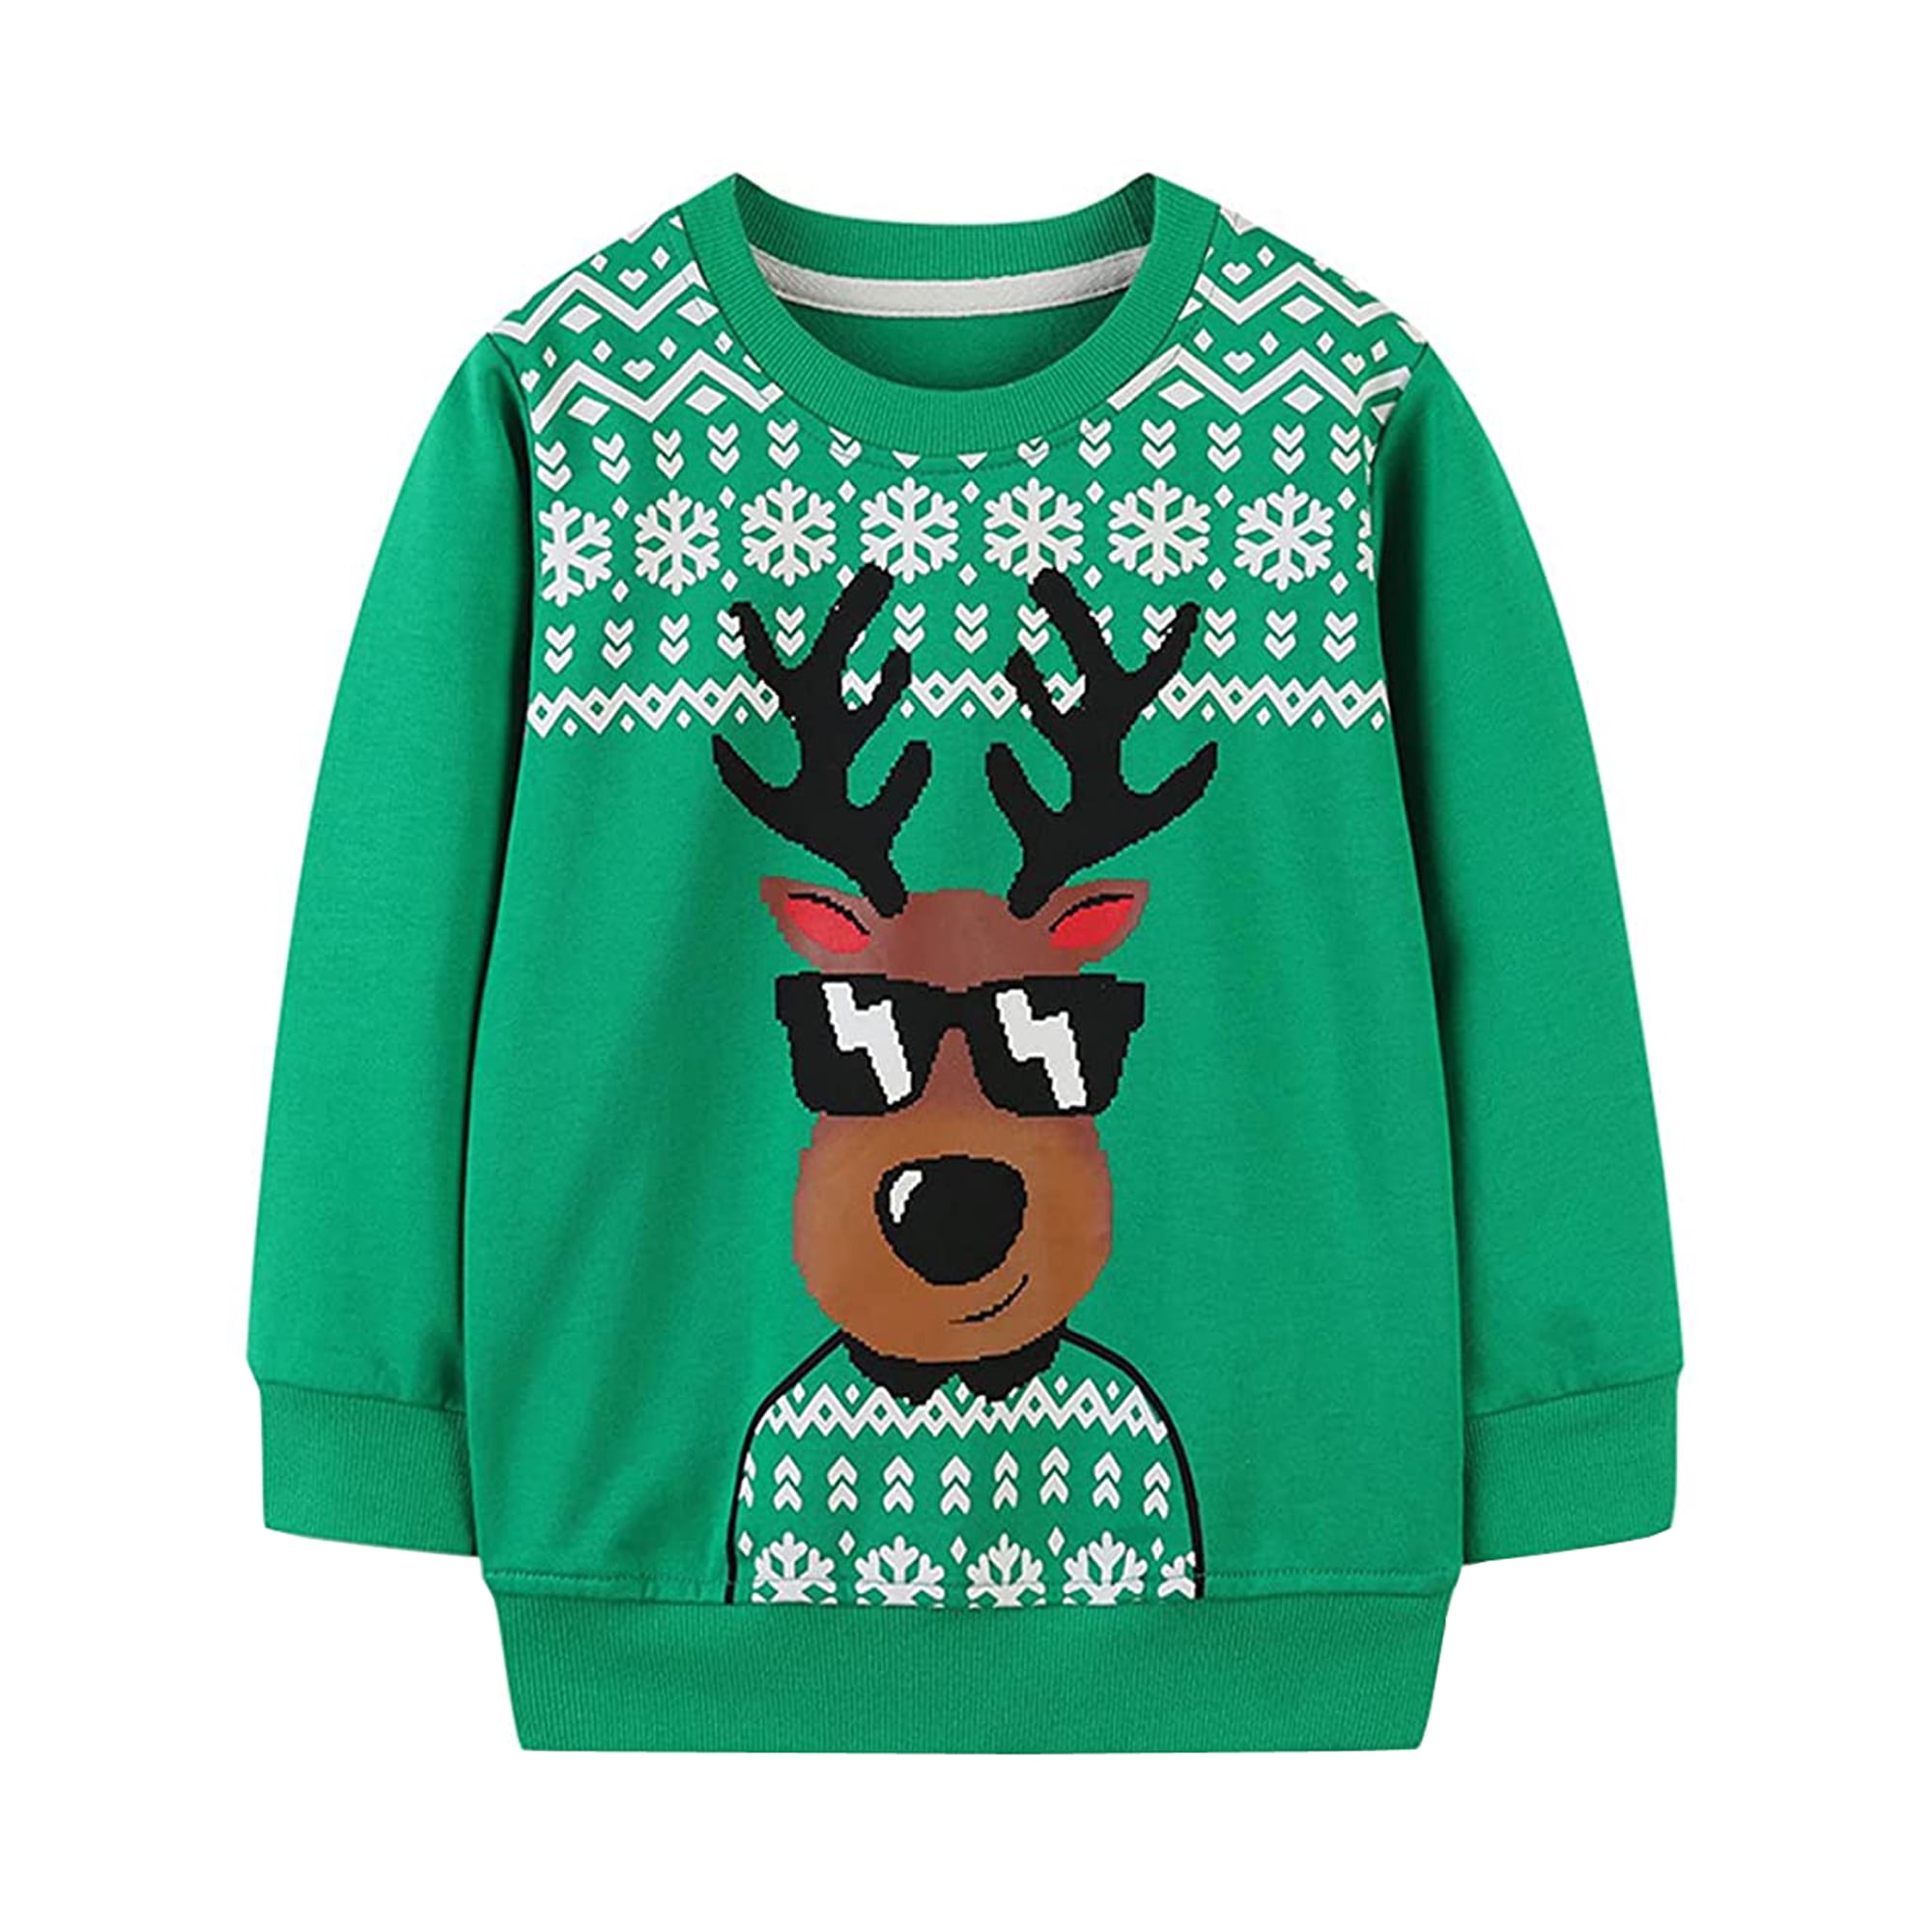 Boys Christmas Sweatshirt Cute Reindeer Jumper Kids Long Sleeve Santa Claus Tops T-Shirts Winter Casual Pullover Xmas Gift Toddler Clothes Age 1-7 Years